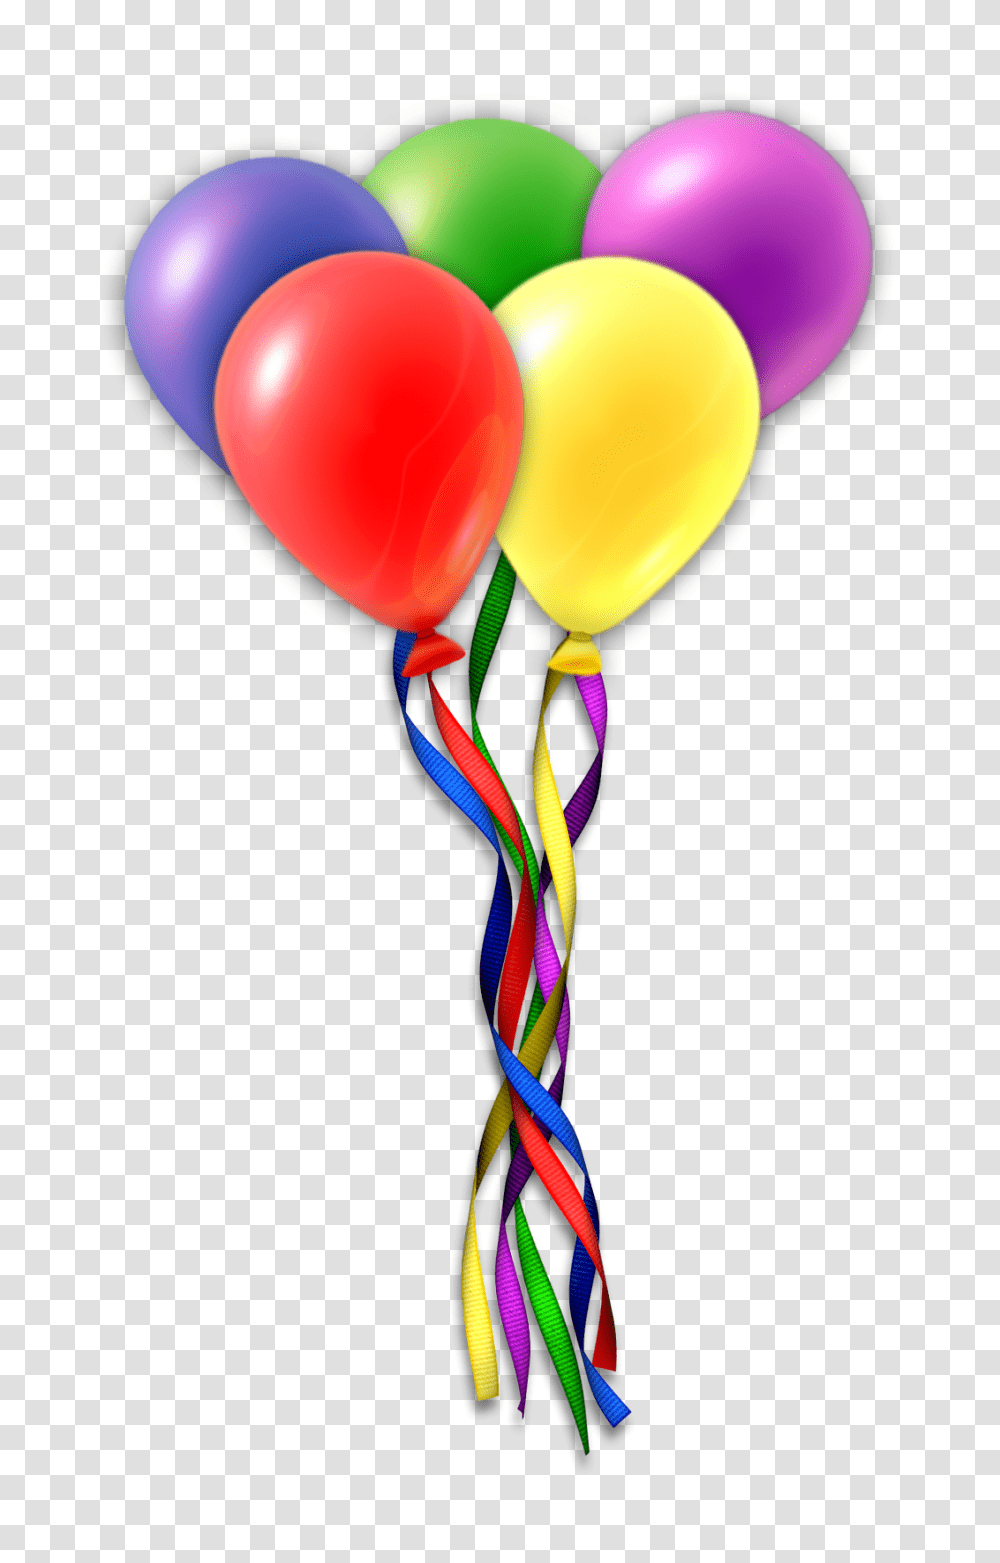 Wishing You A Hbd Balloons Transparent Png